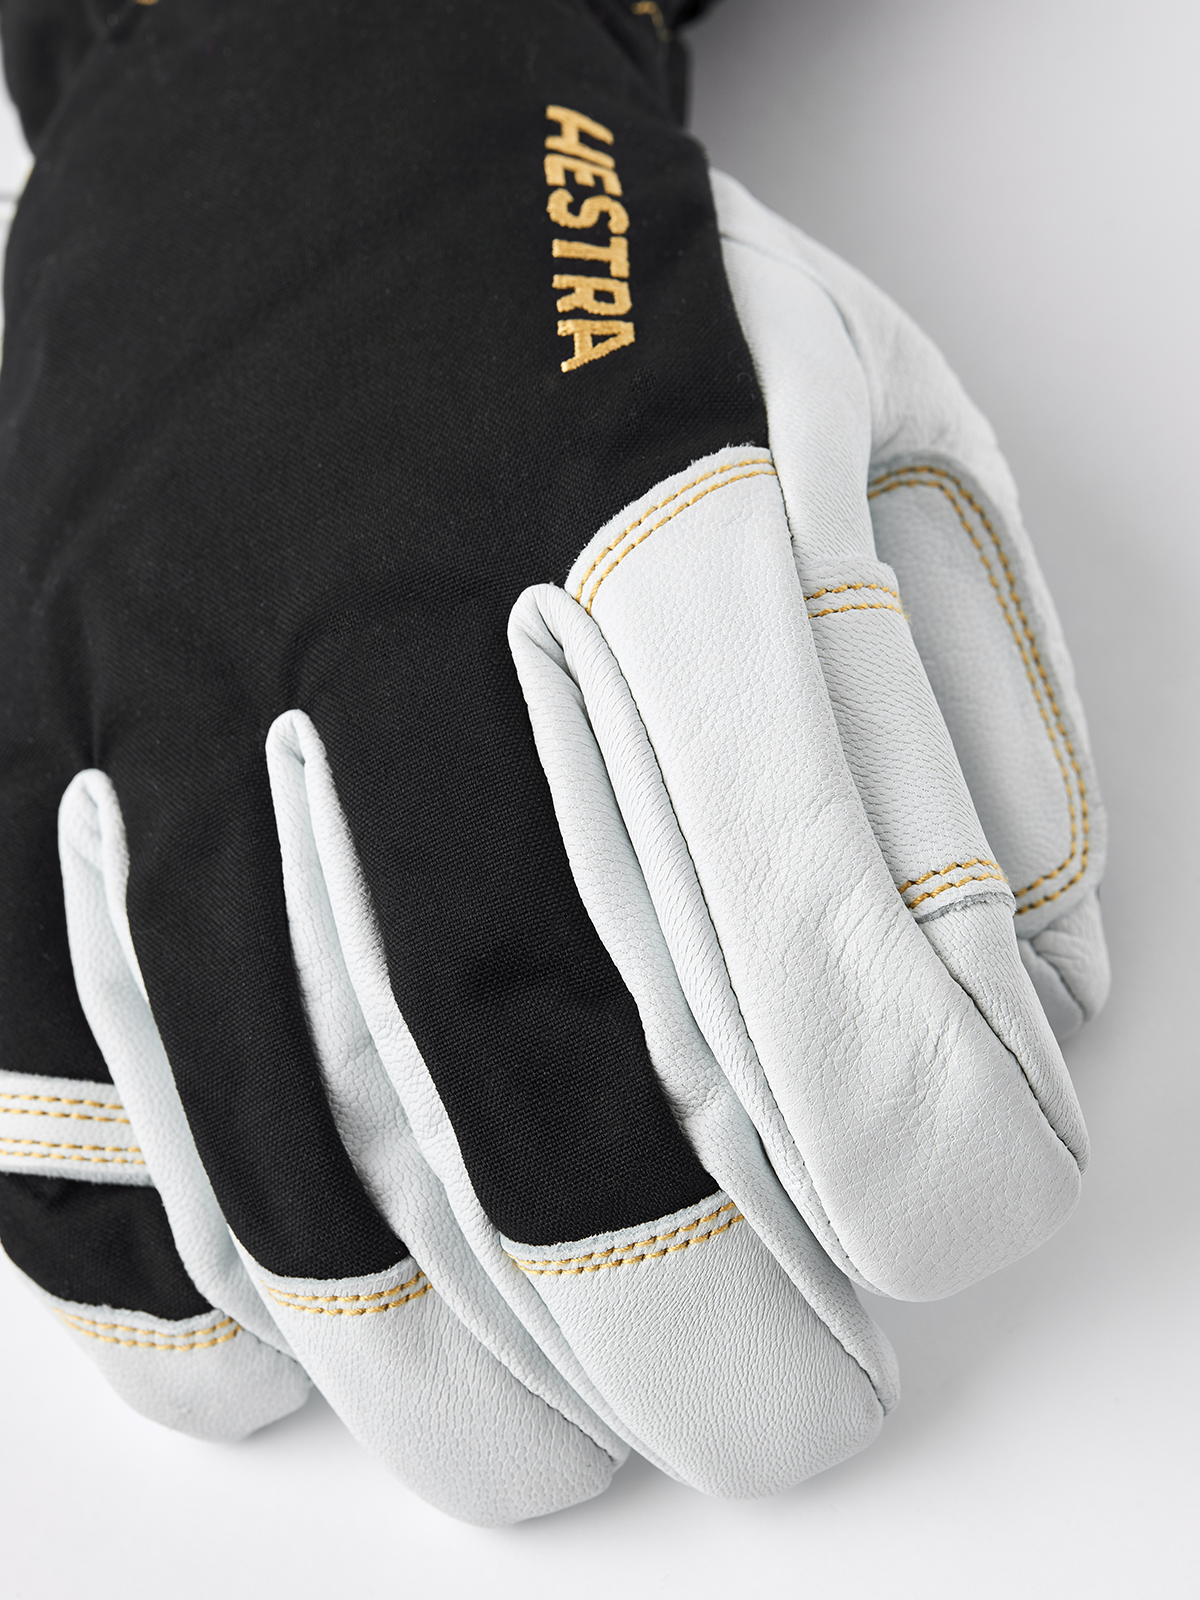 Army Leather GORE-TEX - Black | Hestra Gloves